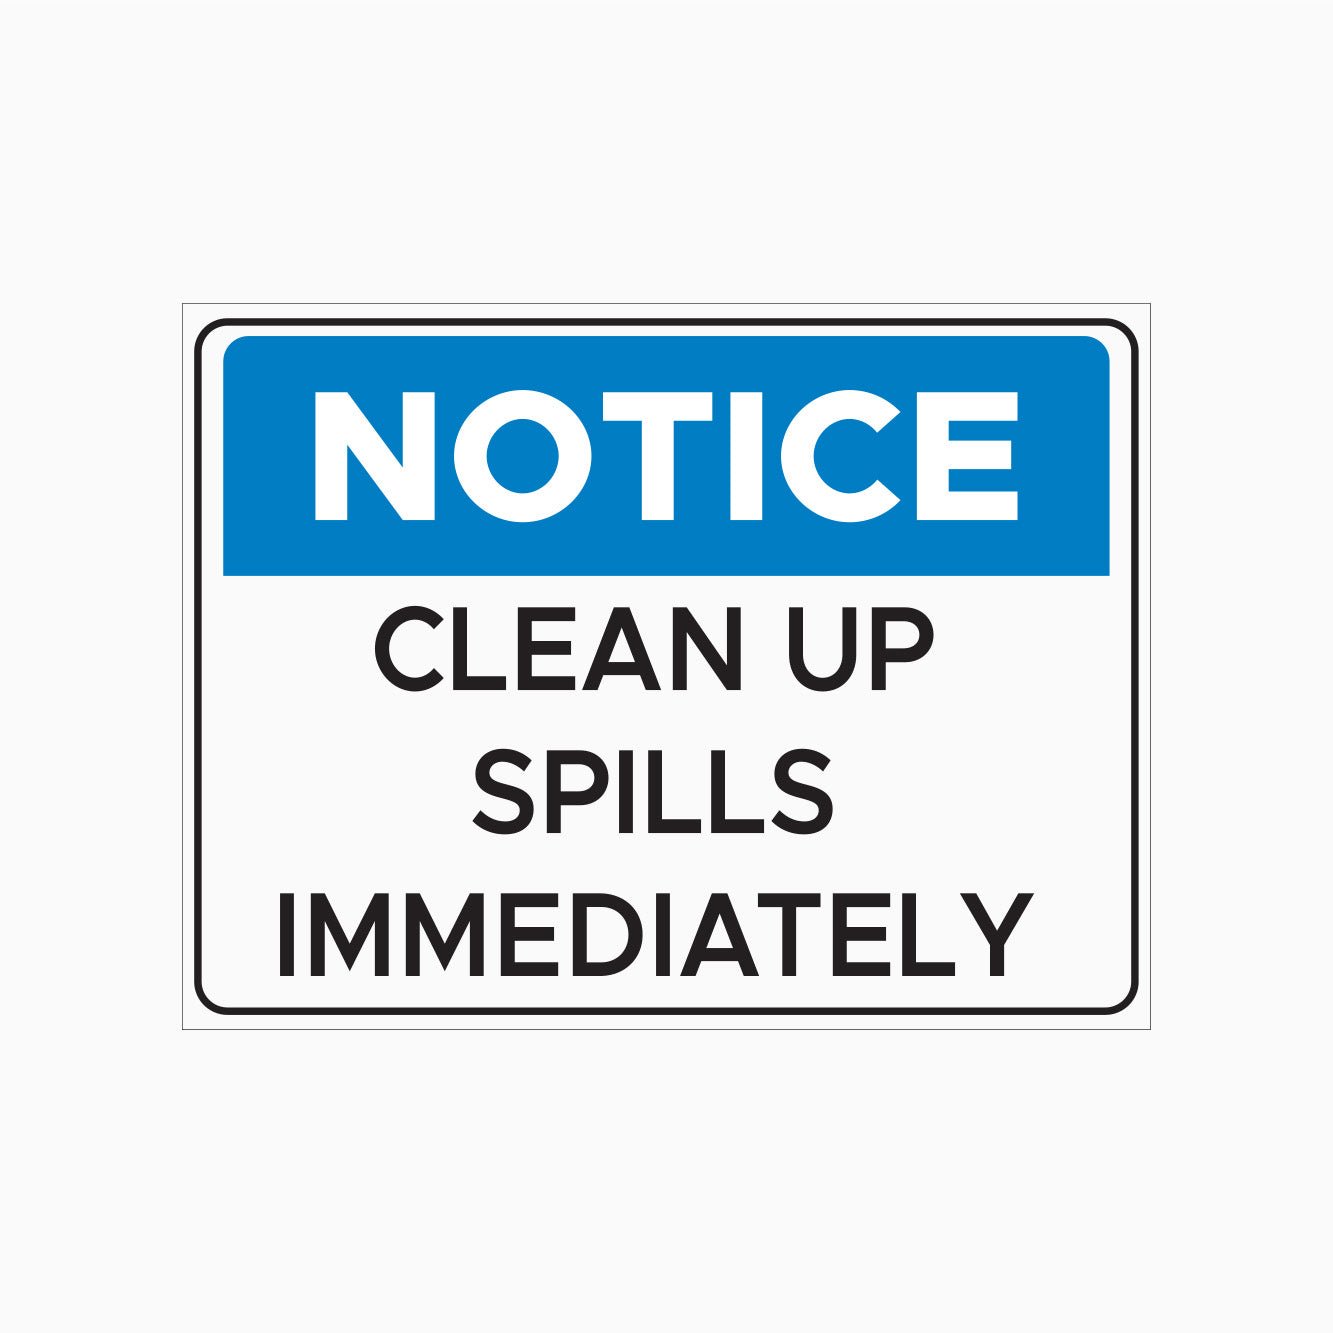 NOTICE SIGN - CLEAN UP SPILLS IMMEDIATELY SIGN